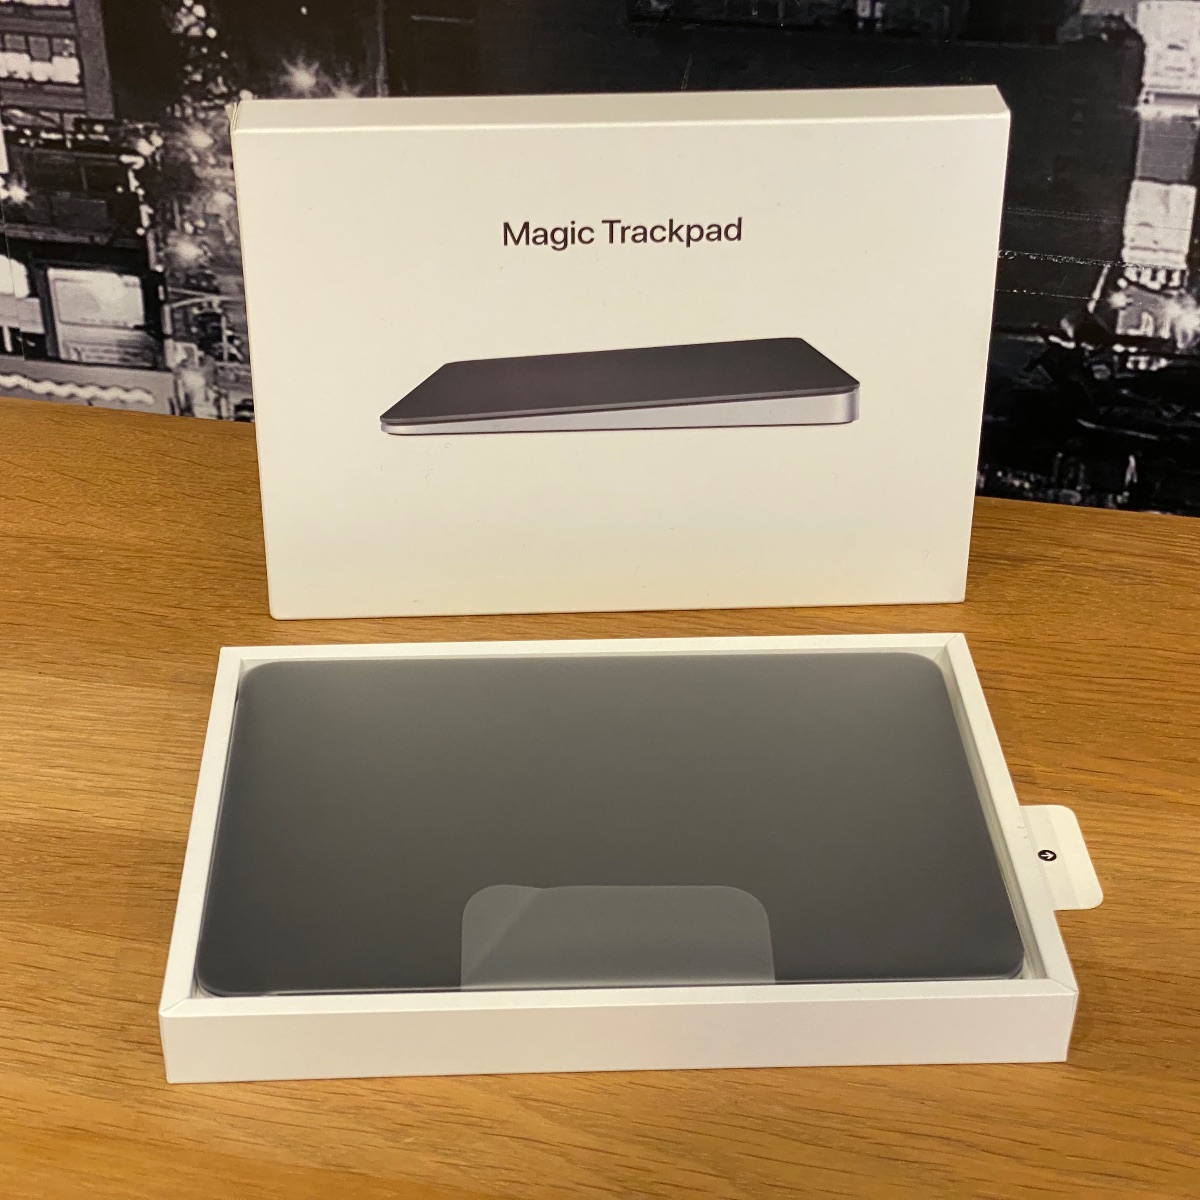 Buy Apple Magic Trackpad - Black Multi-Touch Surface